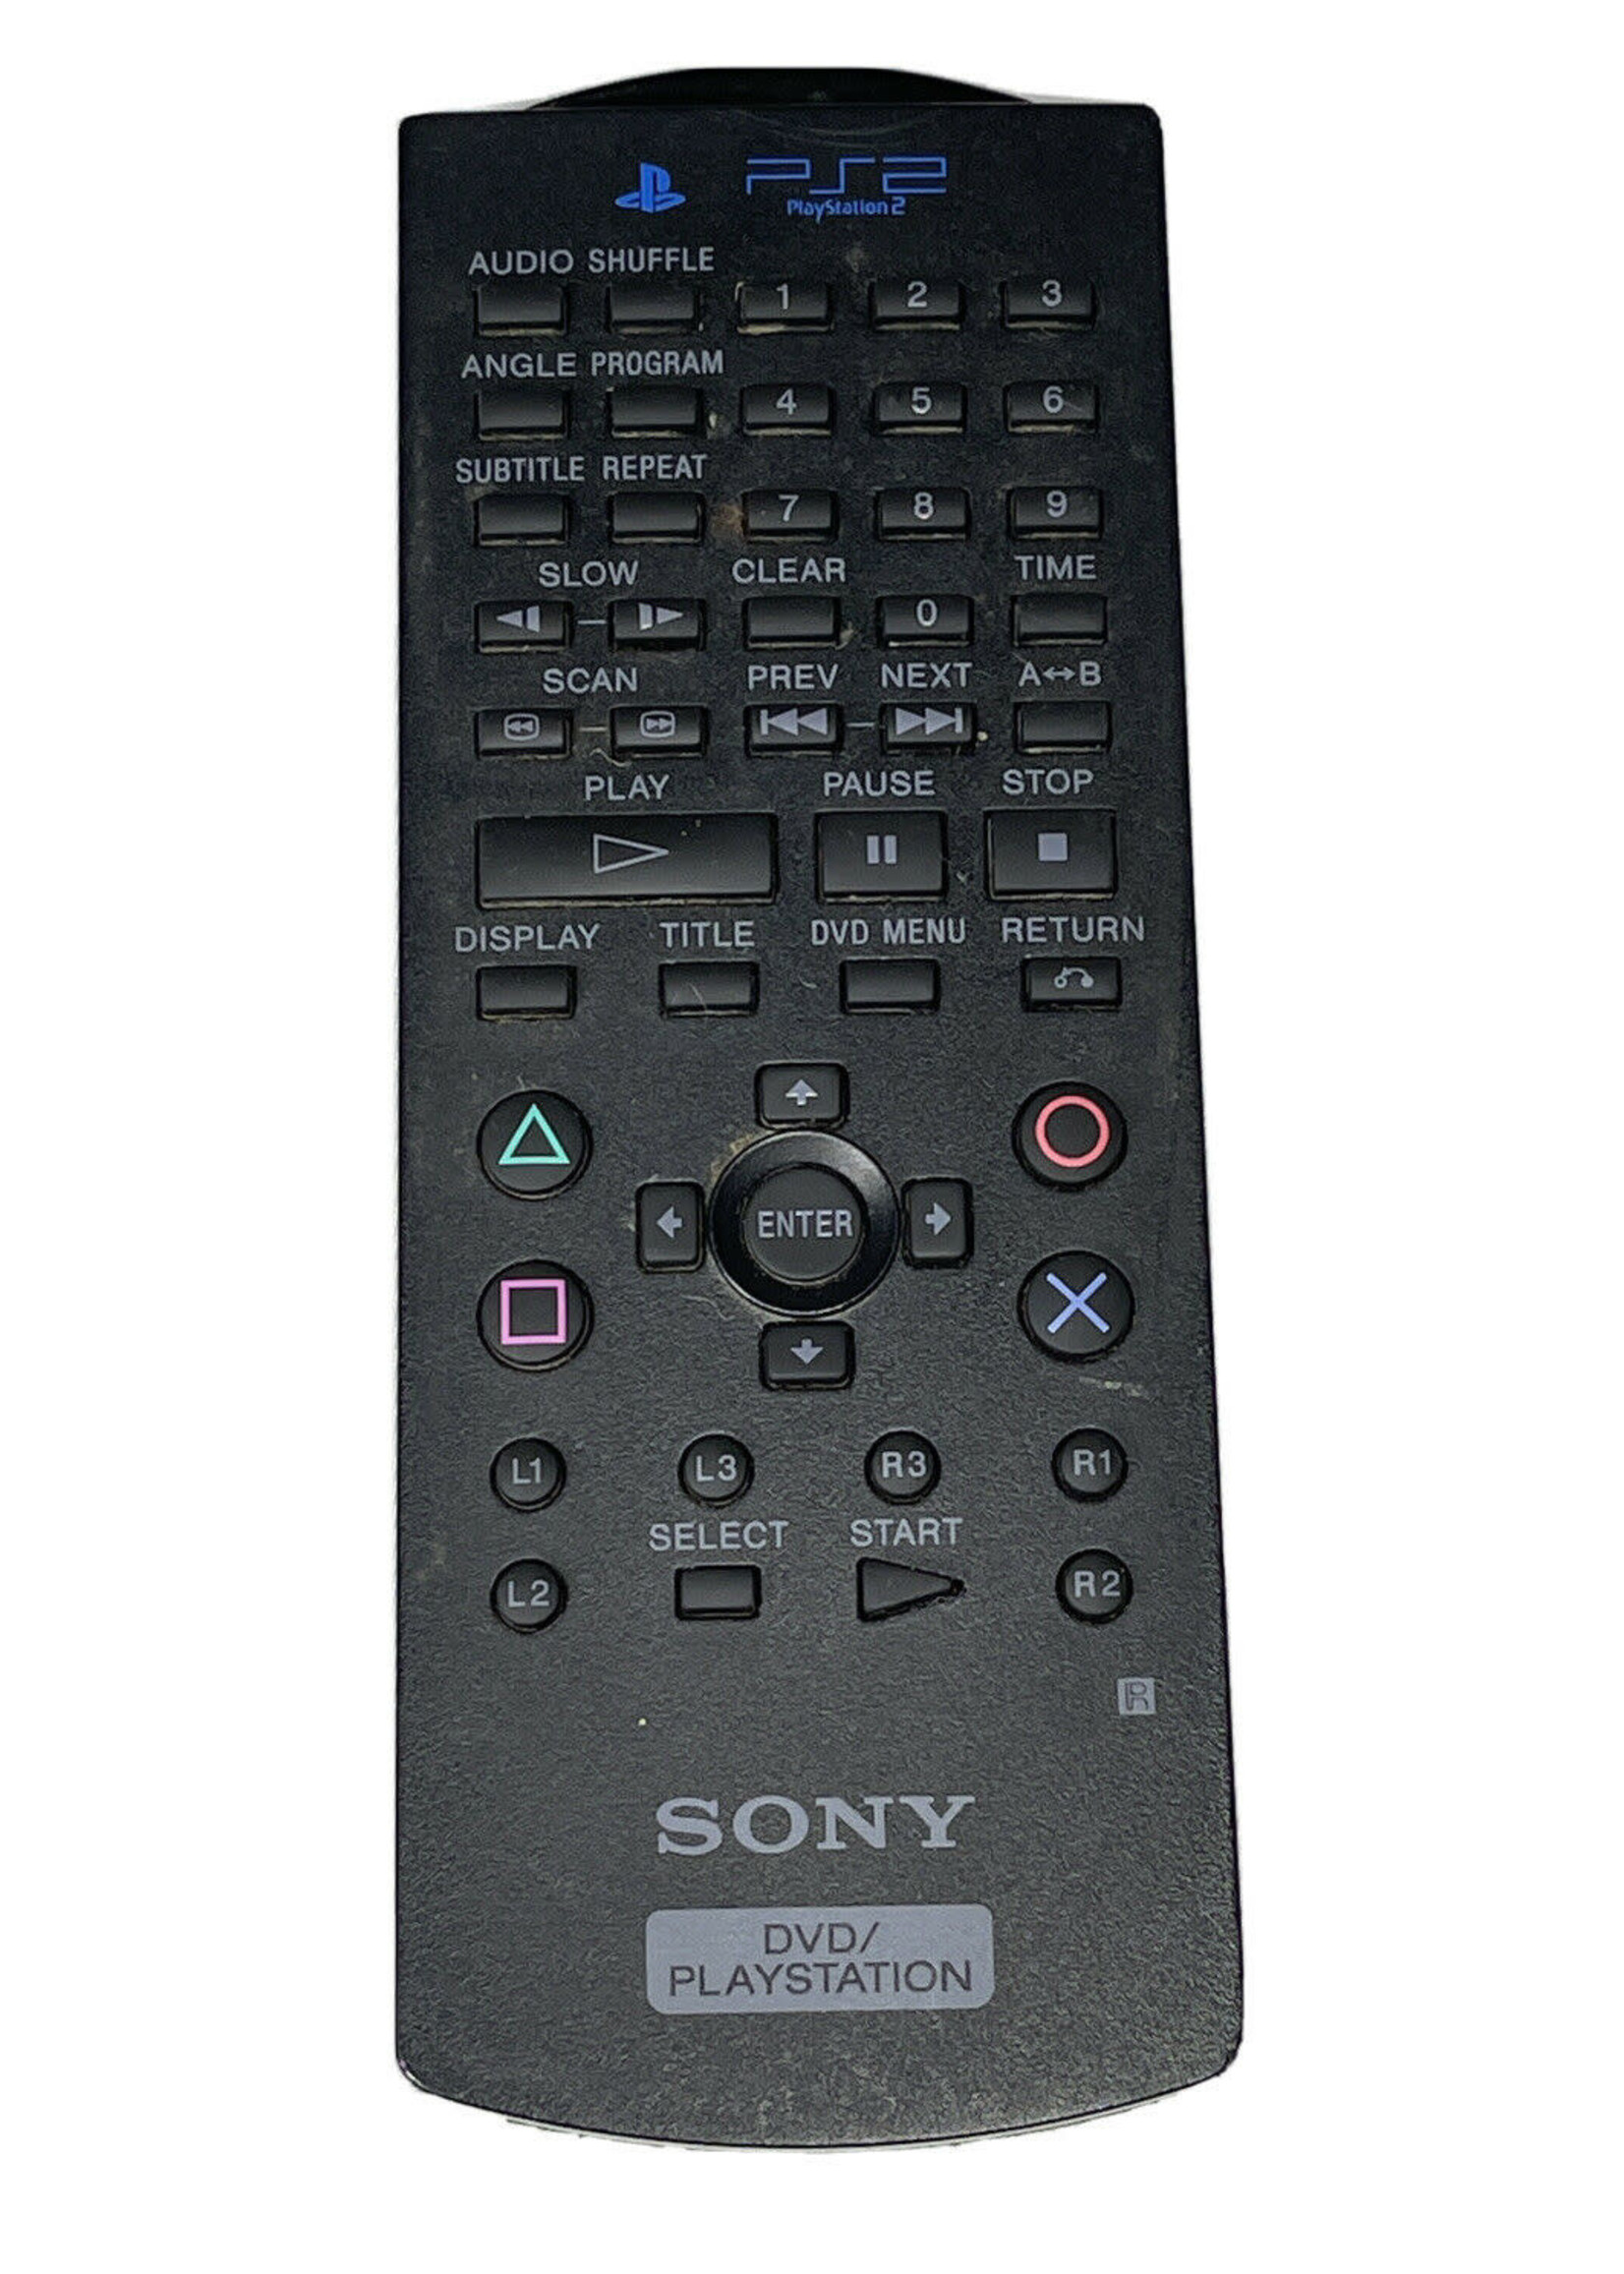 Sony PlayStation 2 (PS2) DVD Remote Control SCPH-10150 No Receiver Dongle